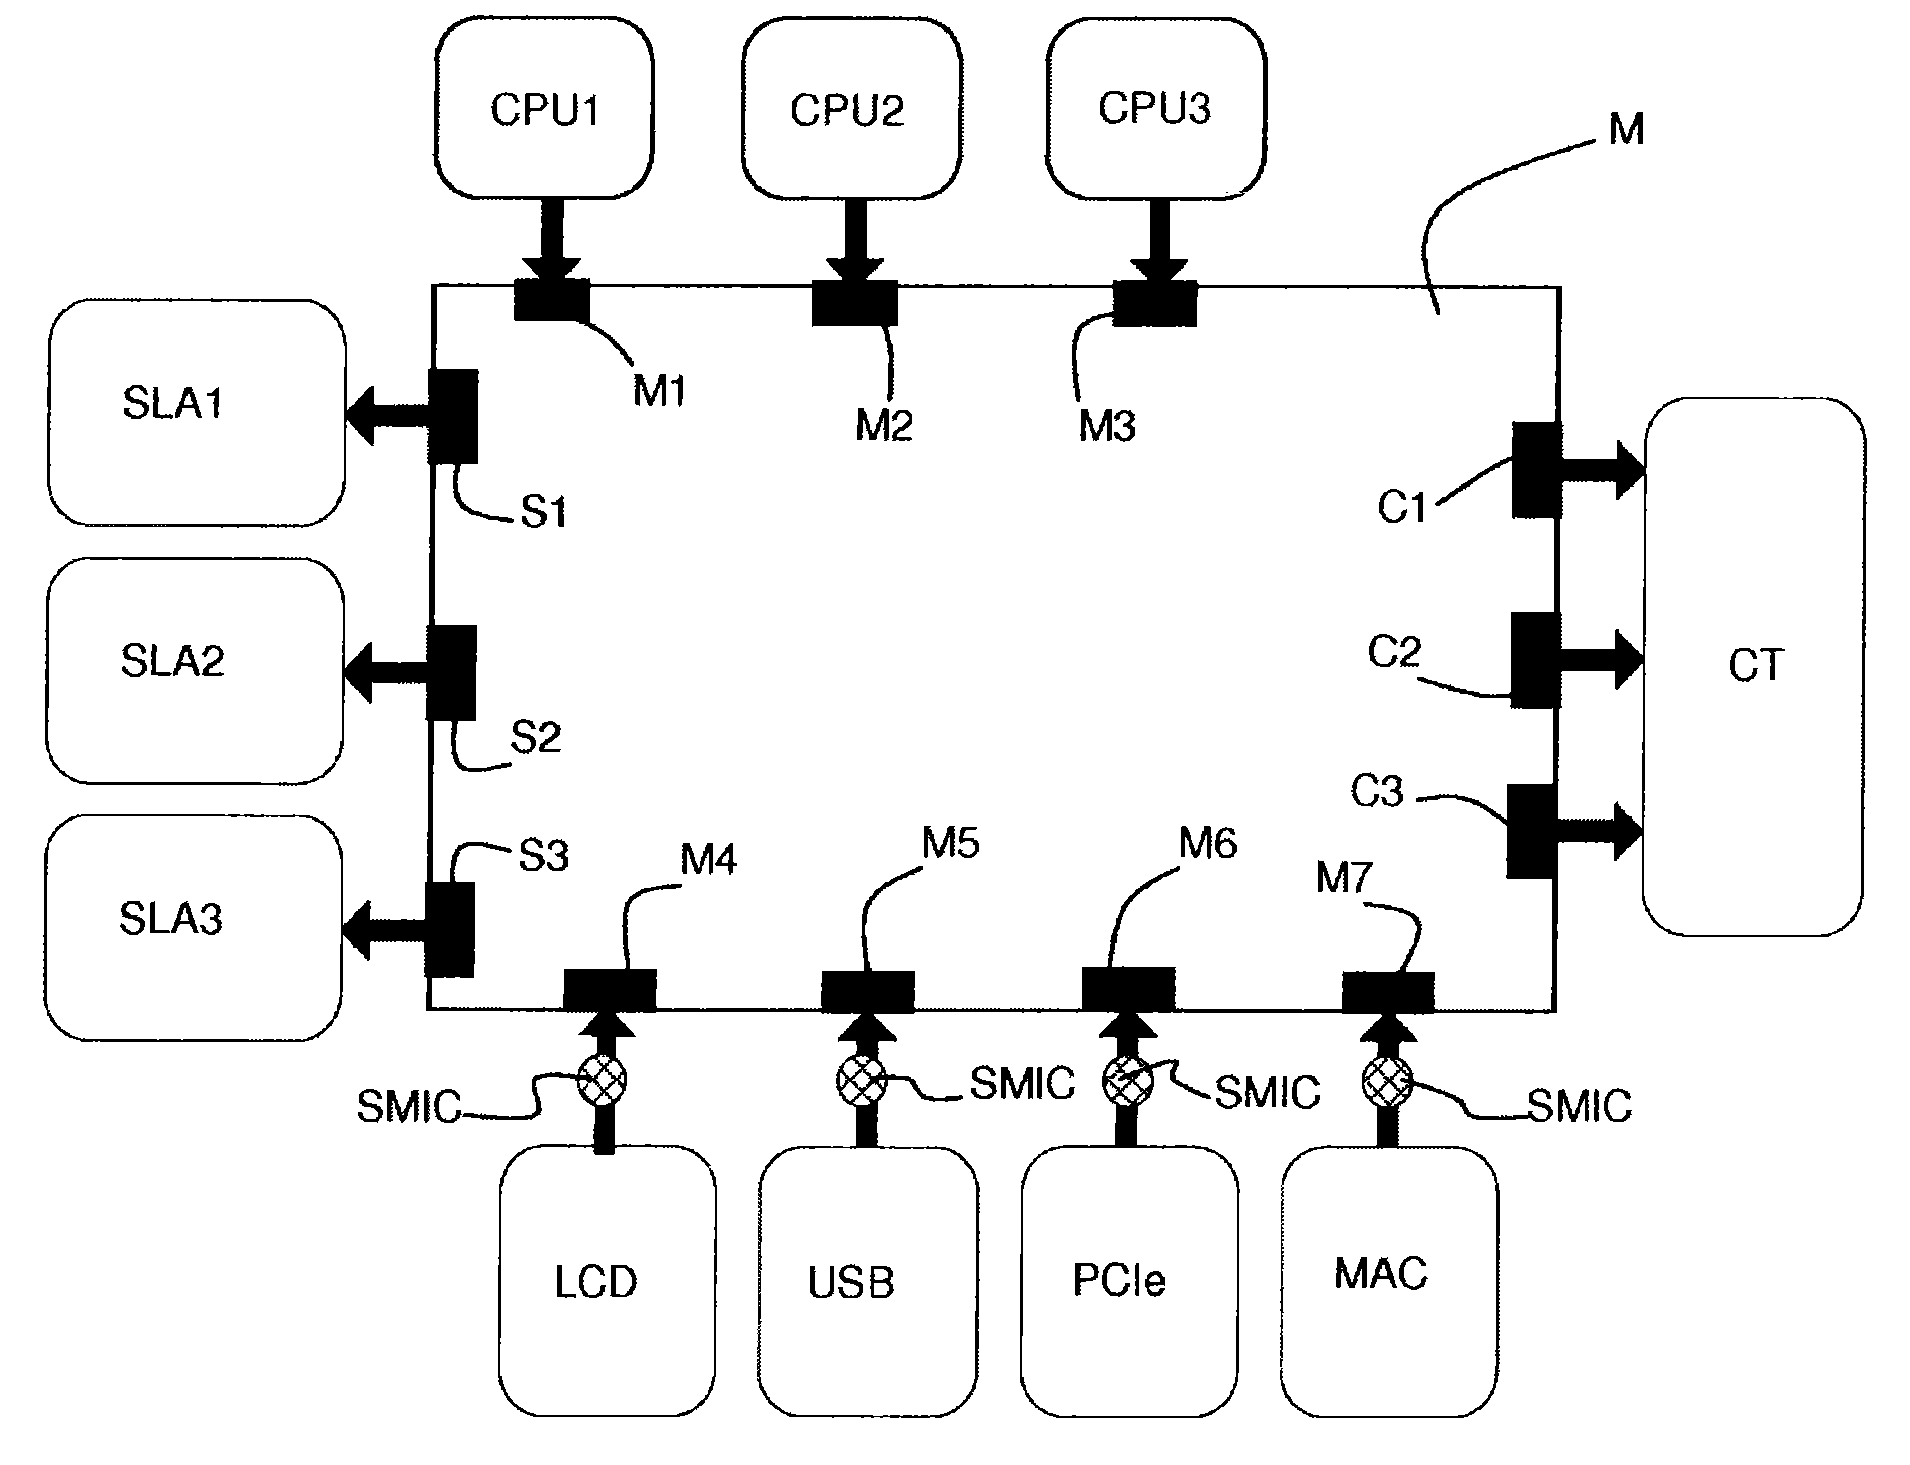 System for managing secure and nonsecure applications on one and the same microcontroller